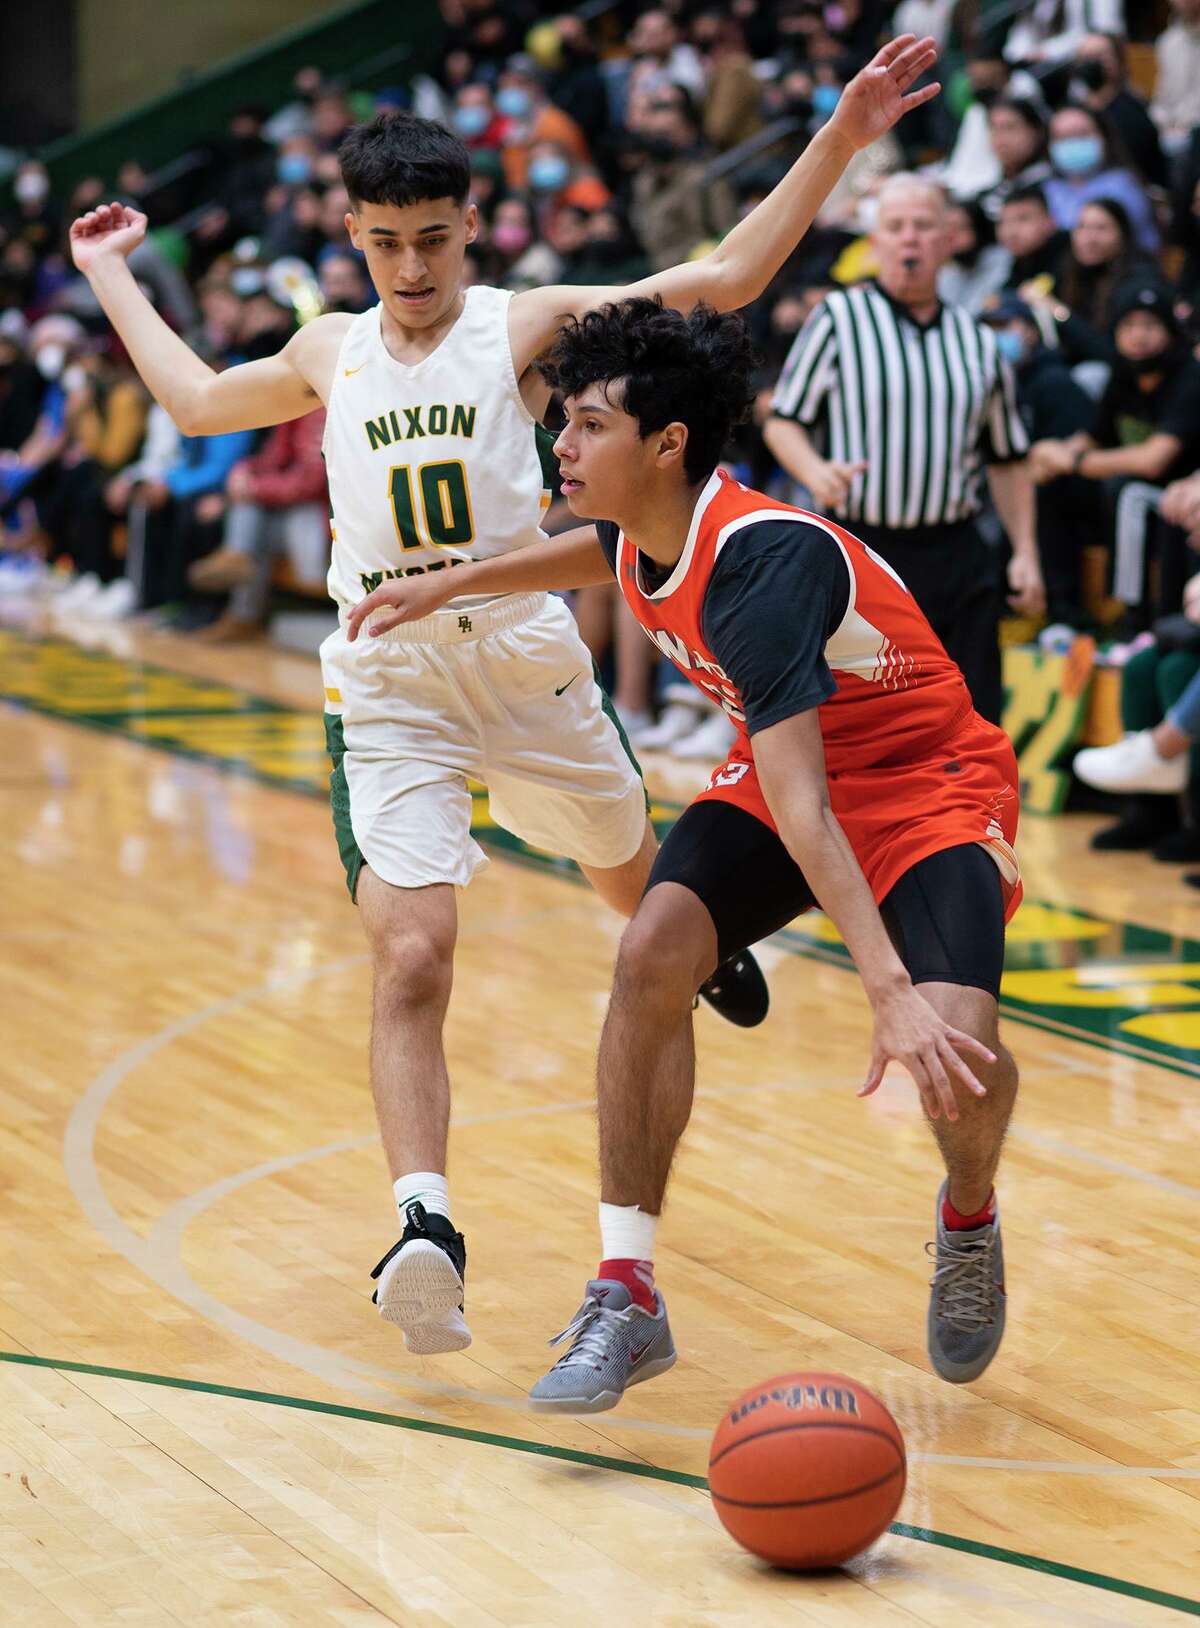 Carlos Castro led all scorers with 19 points in United’s win over United South on Friday night.